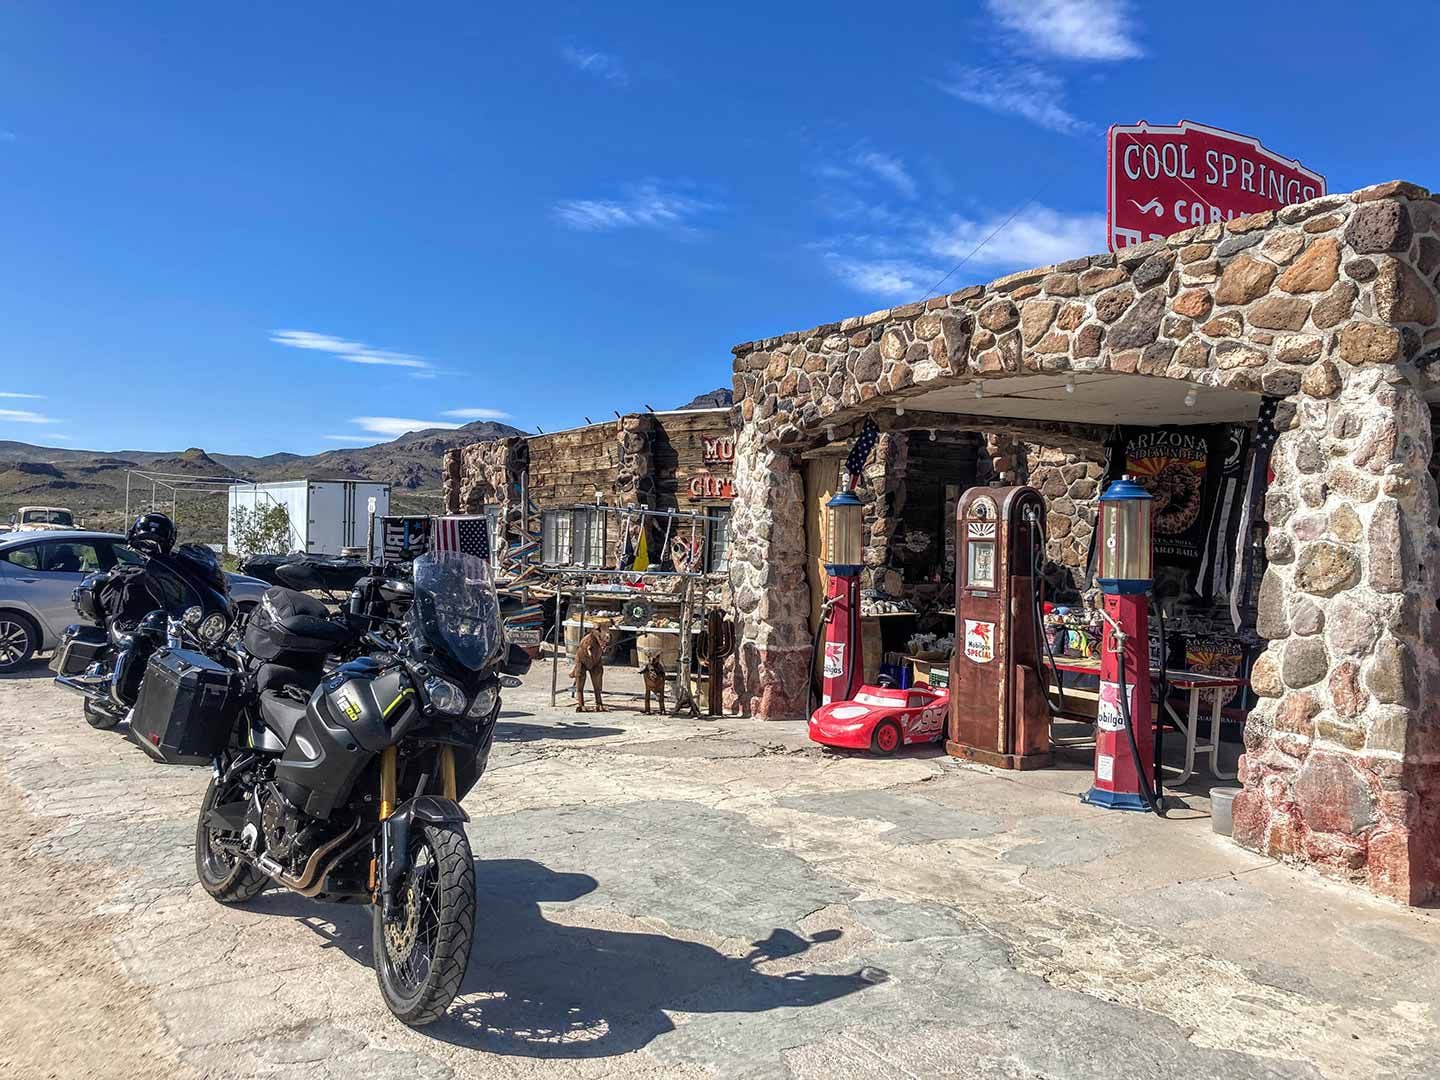 Cool Springs Station on Route 10 (Route 66), between Kingman and Oatman.